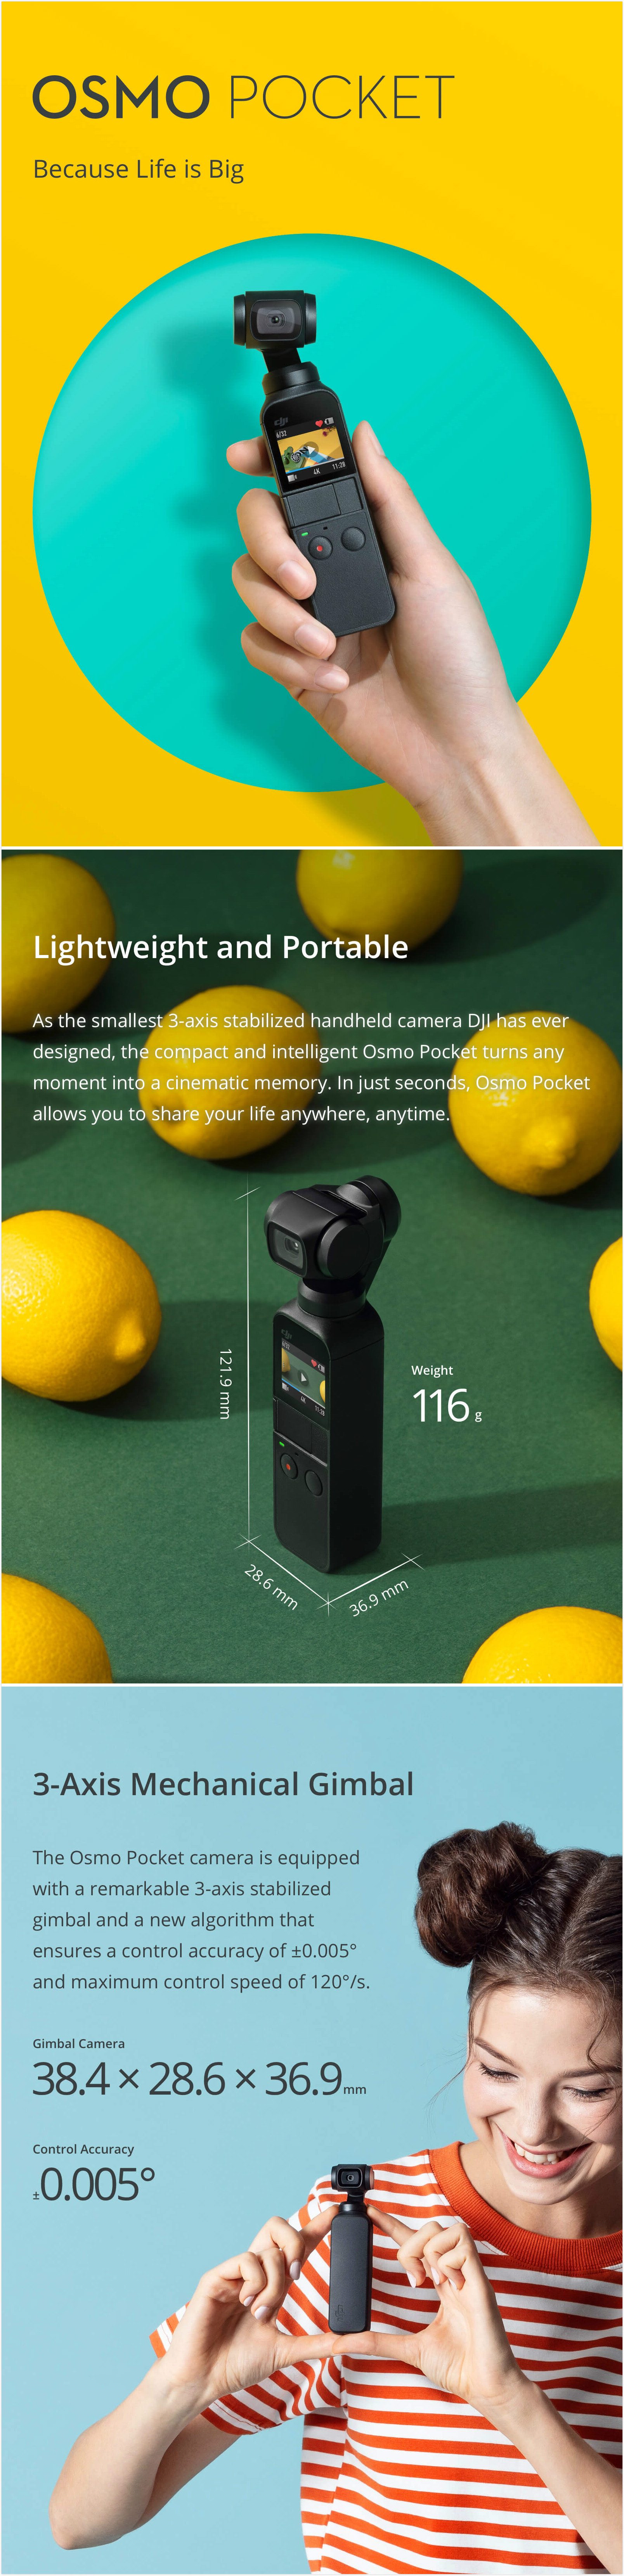 DJI-Osmo-Pocket-3-Axis-Stabilized-Handheld-Camera-HD-4K-60fps-80-Degree-FPV-Gimbal-Smartphone-15Coup-1388889